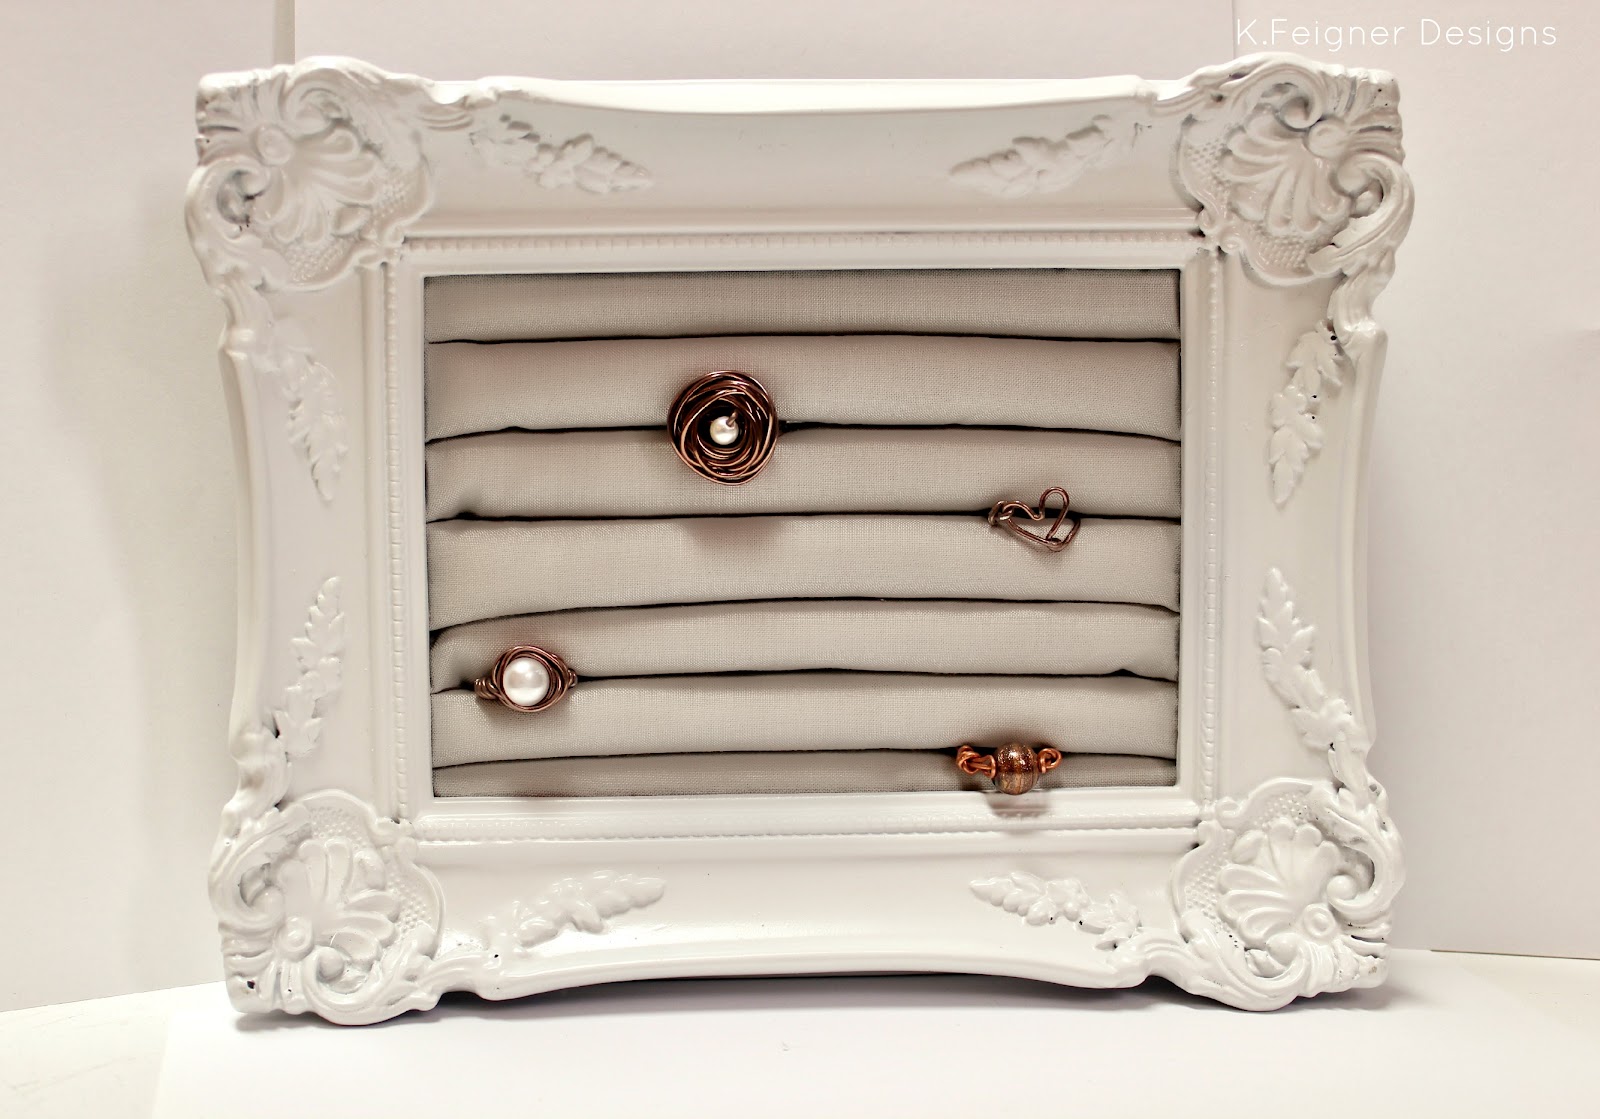 The Crafty Housewife: DIY Frame Ring Display Holder